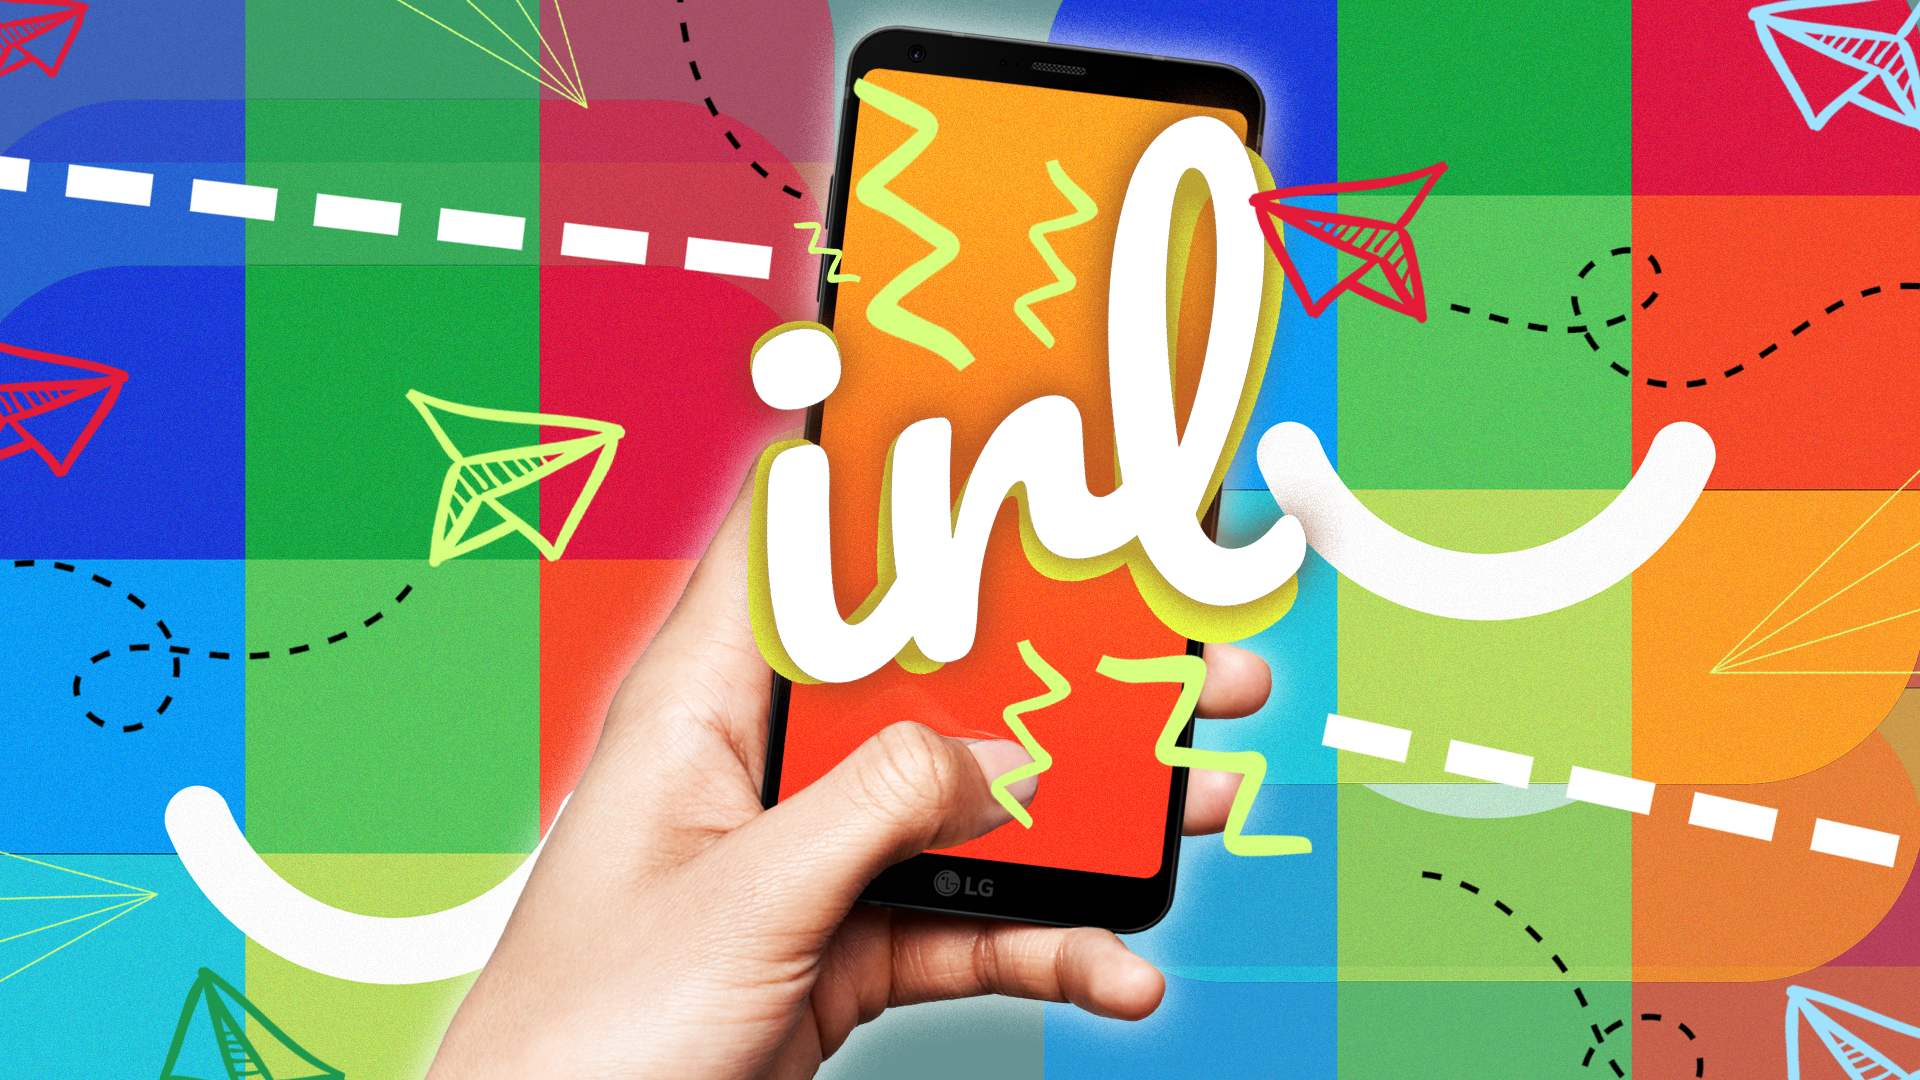 Exclusive – IRL is putting the ‘social’ back in social media